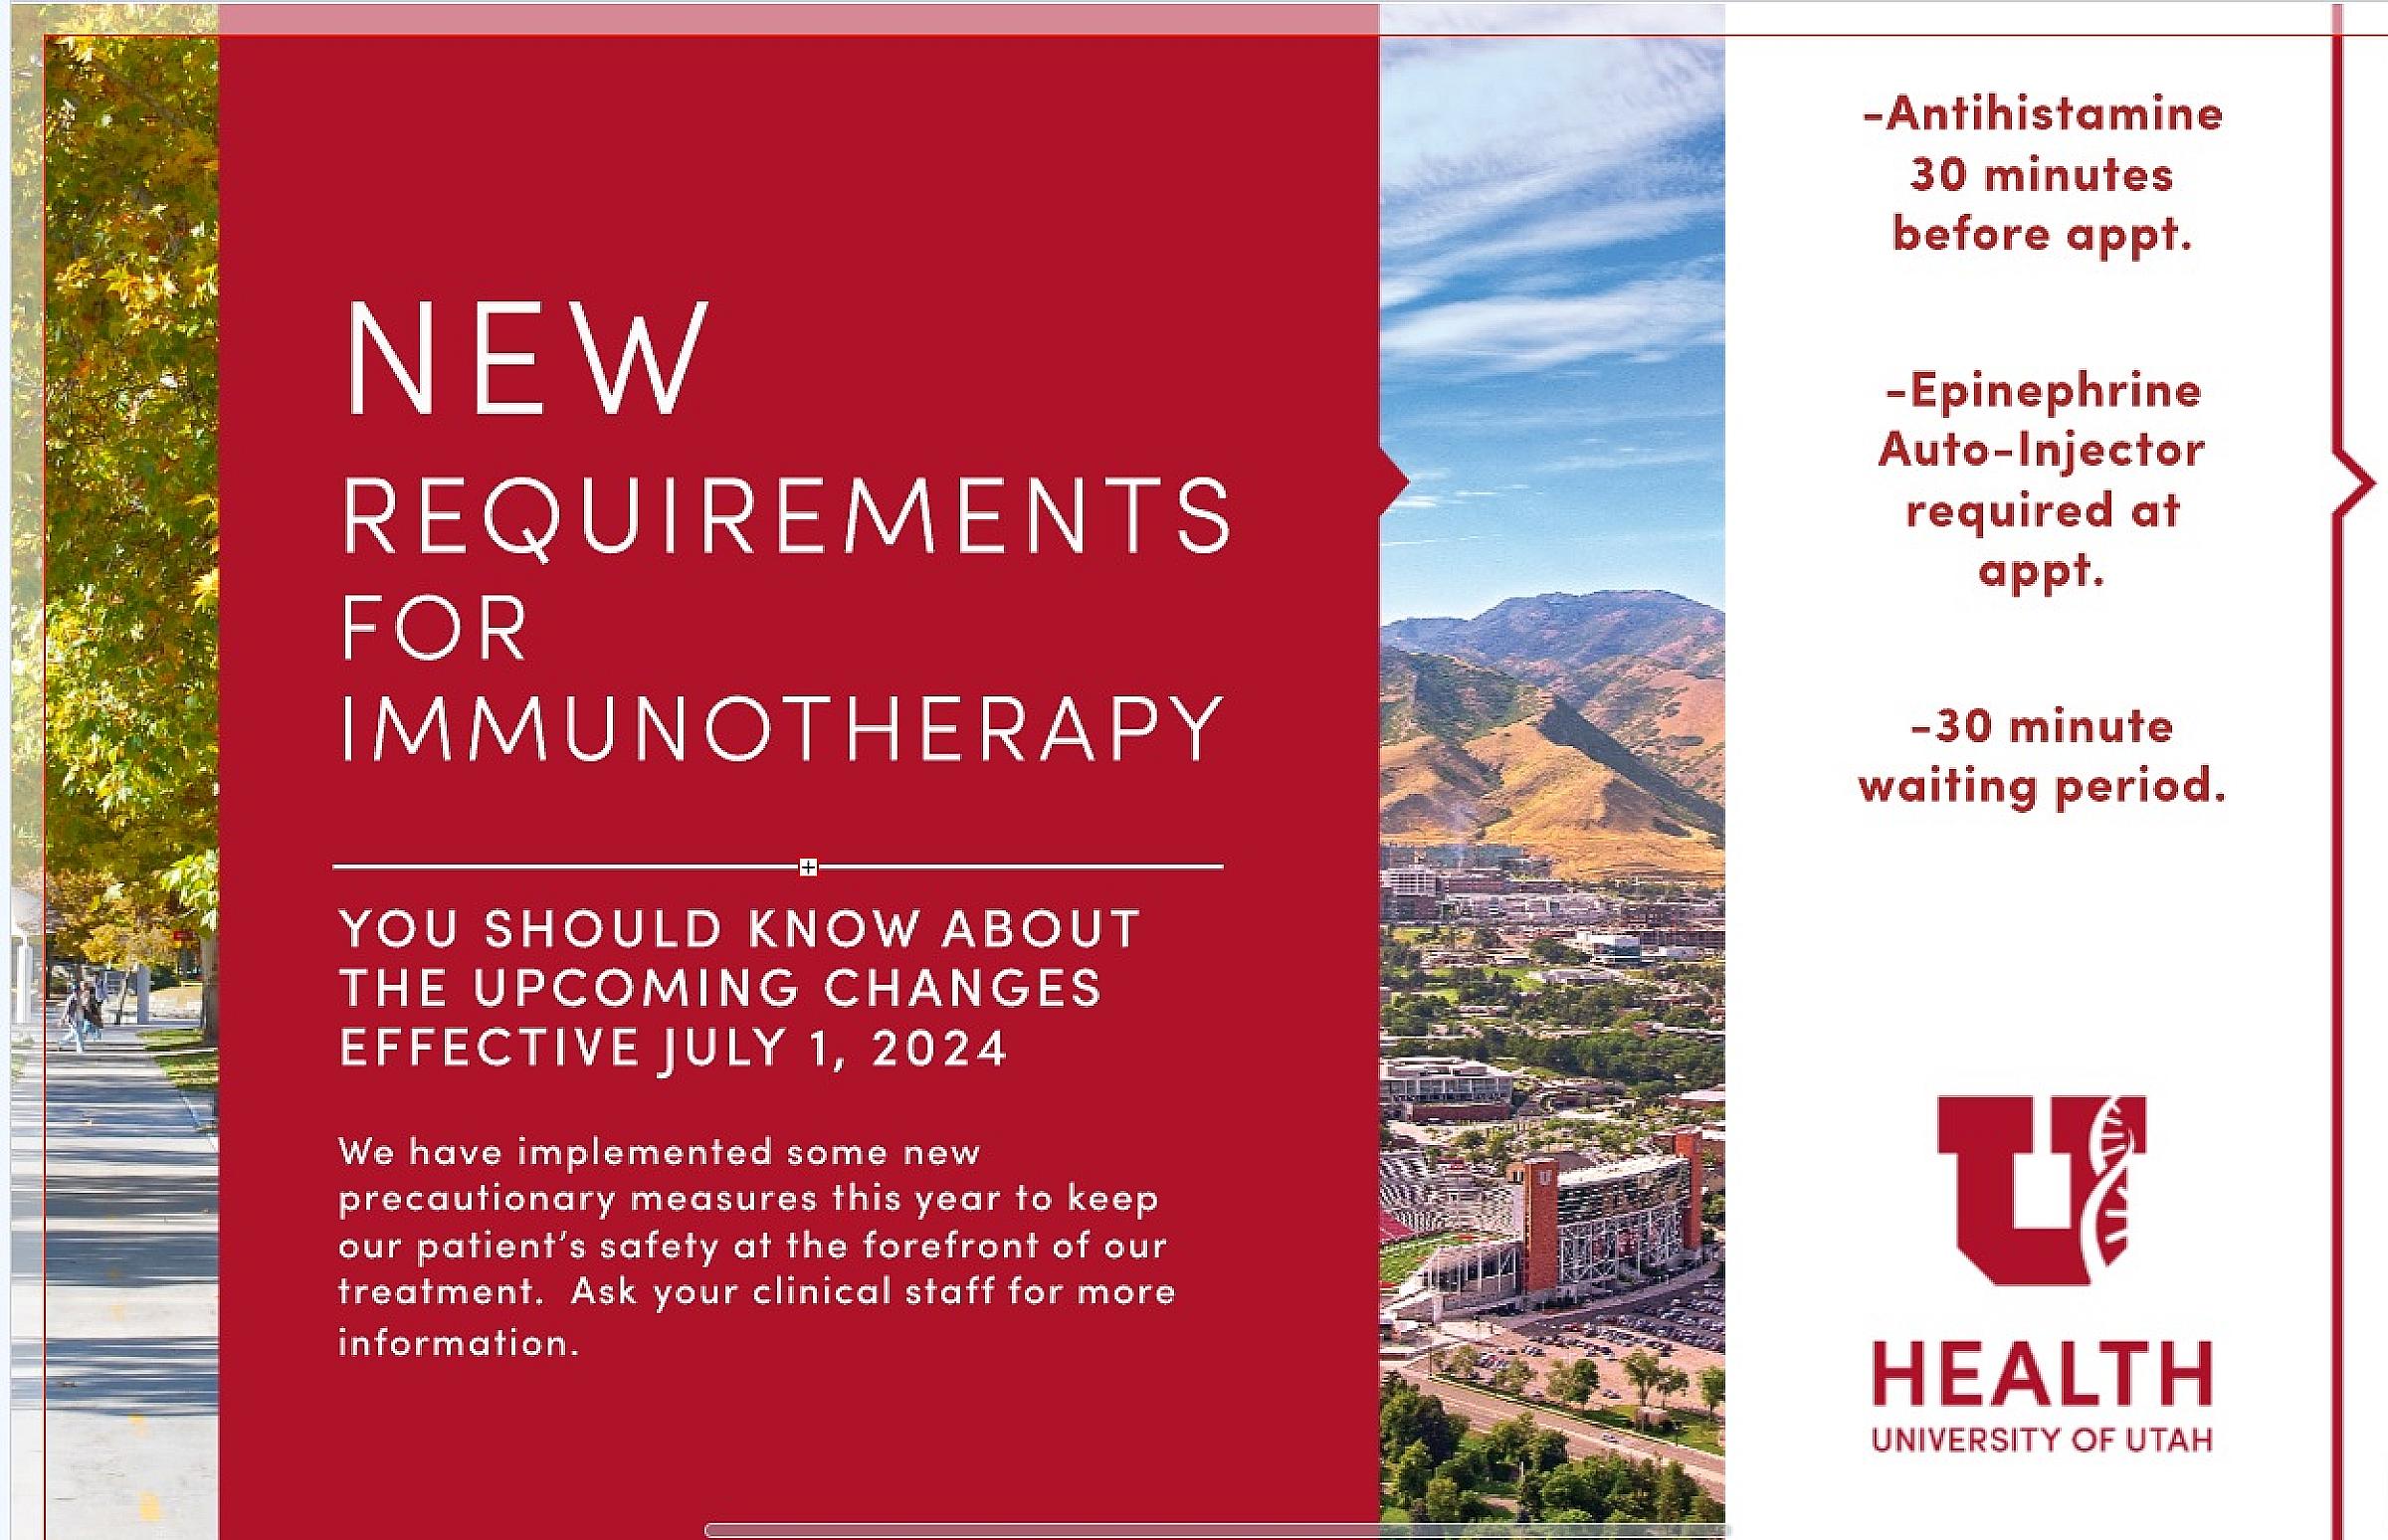 inforgraphic of the new requirements university of utah allergiests are requiring for immunotheraphy appointments